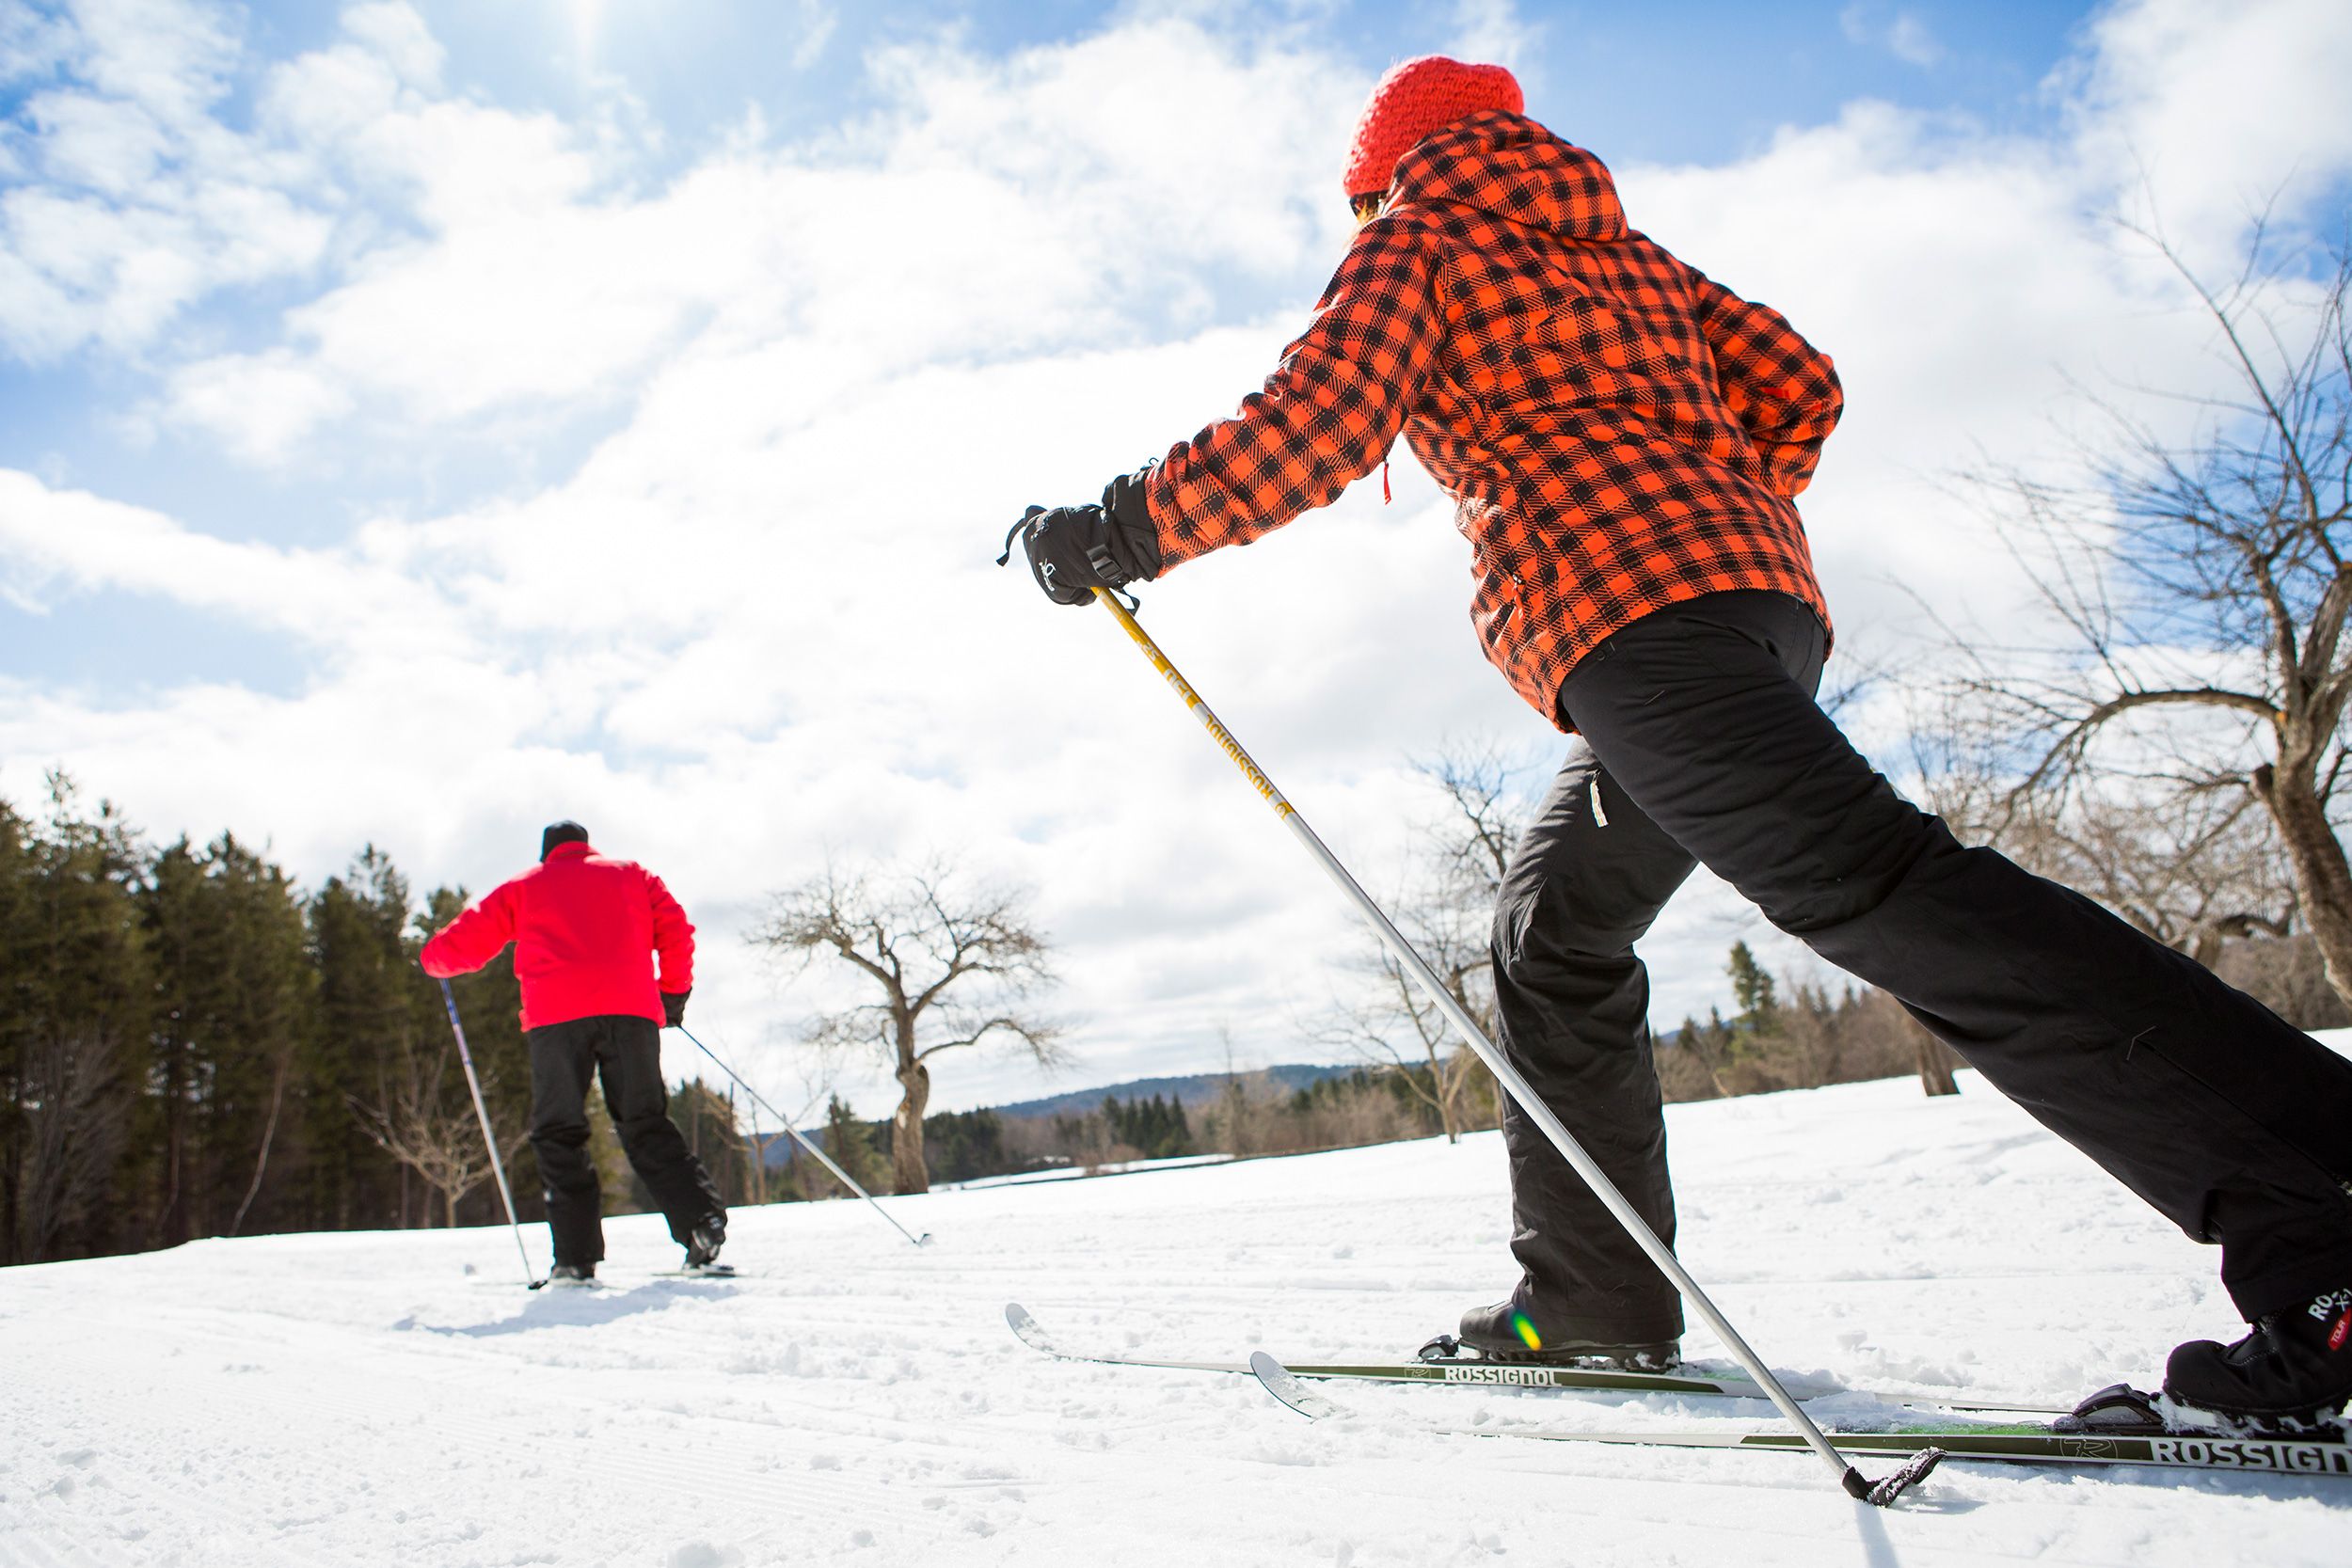 X-country skiing trips at Notchview in Western MA are unparalleled!